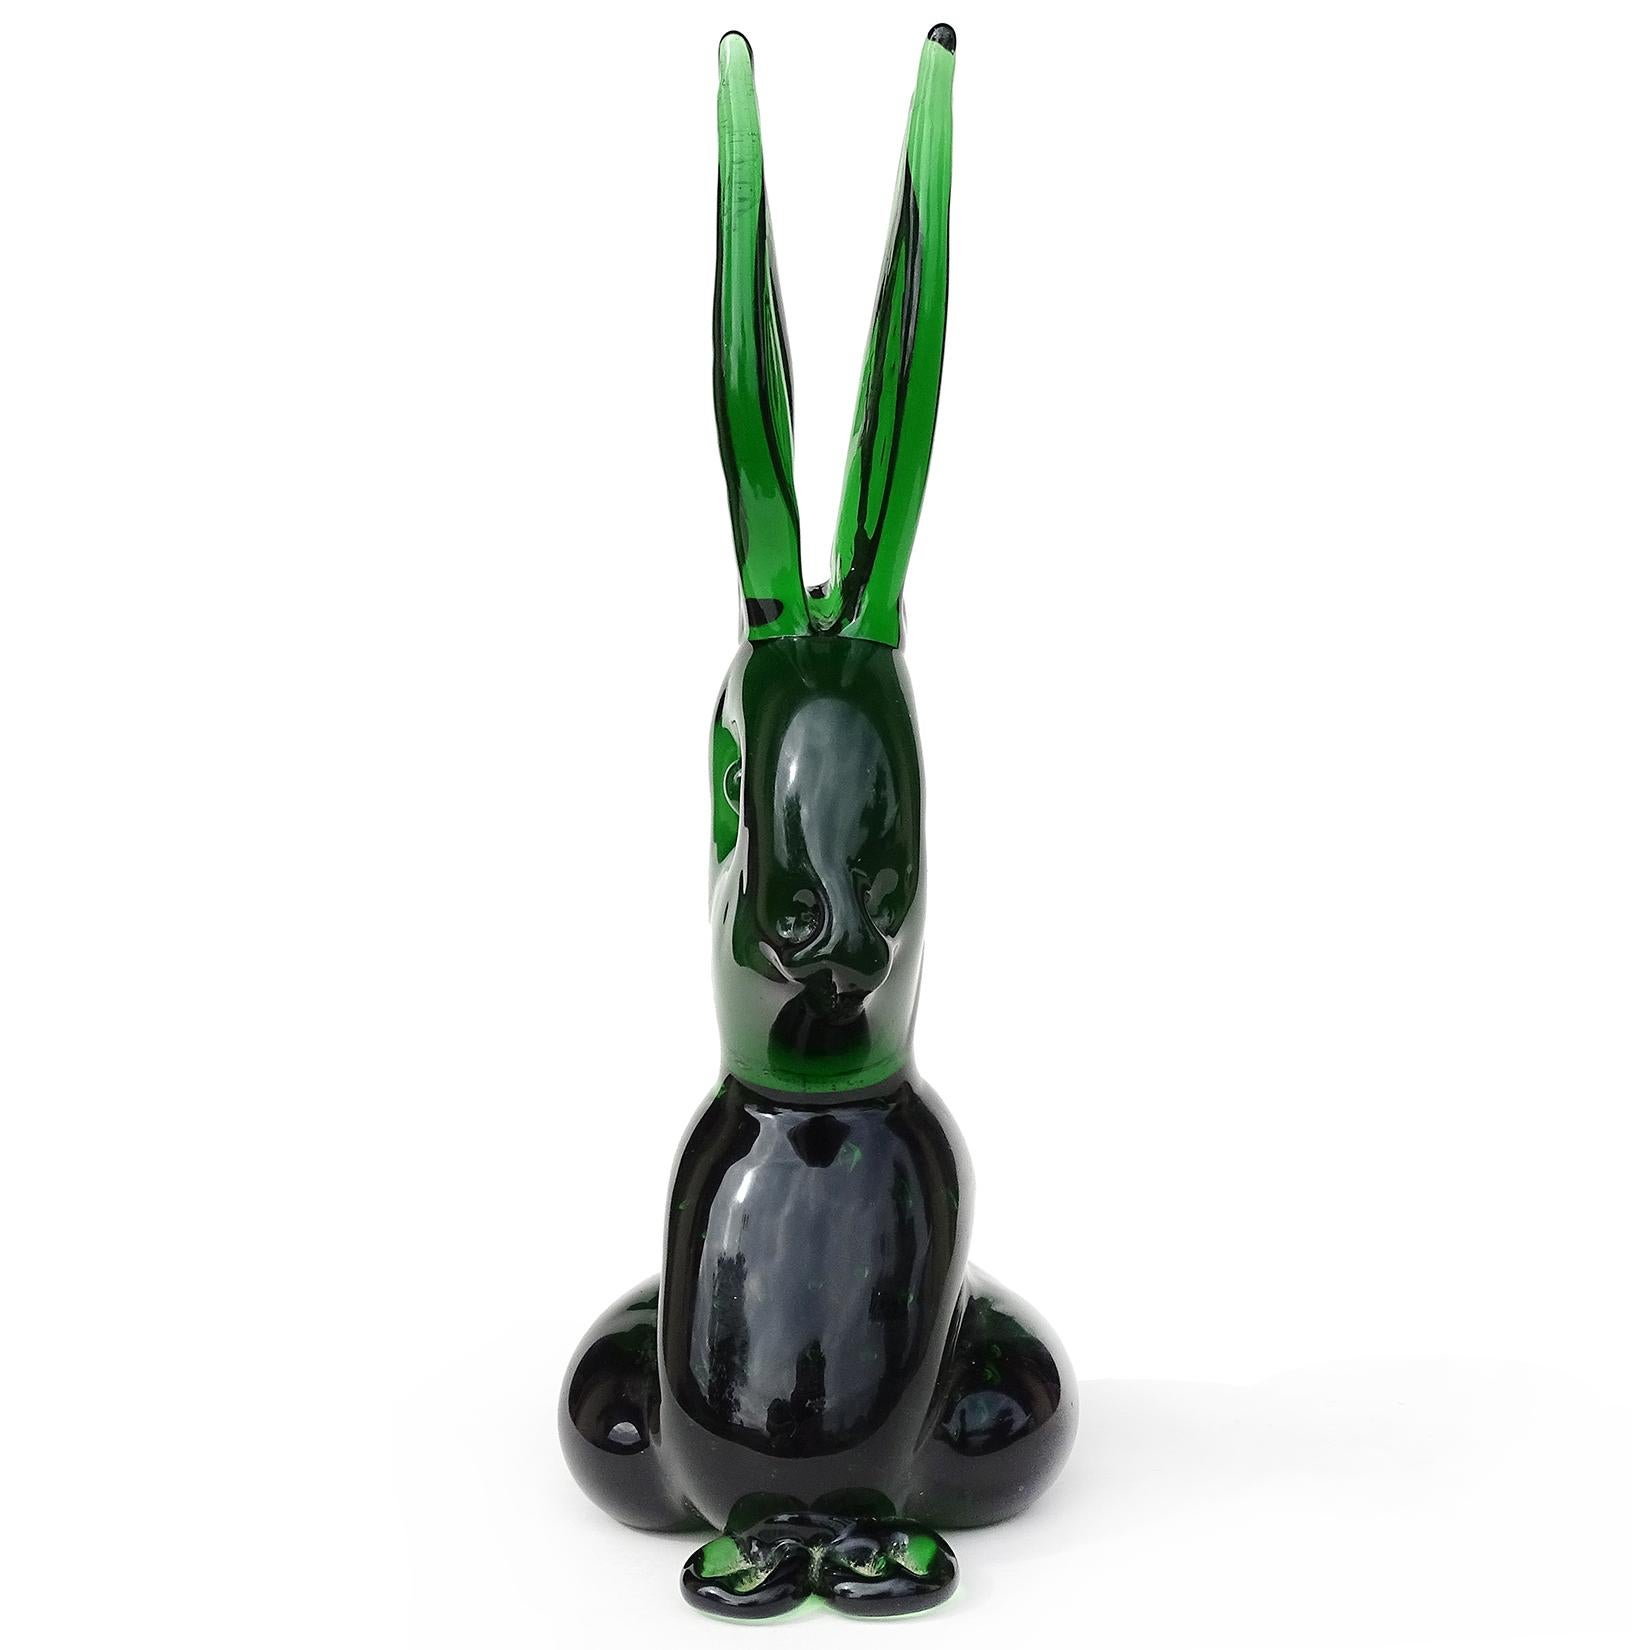 Cute vintage handblown dark green with controlled bubbles, Italian art glass bunny rabbit sculpture / figure. It does not have a label, but I have owned previous ones with a 